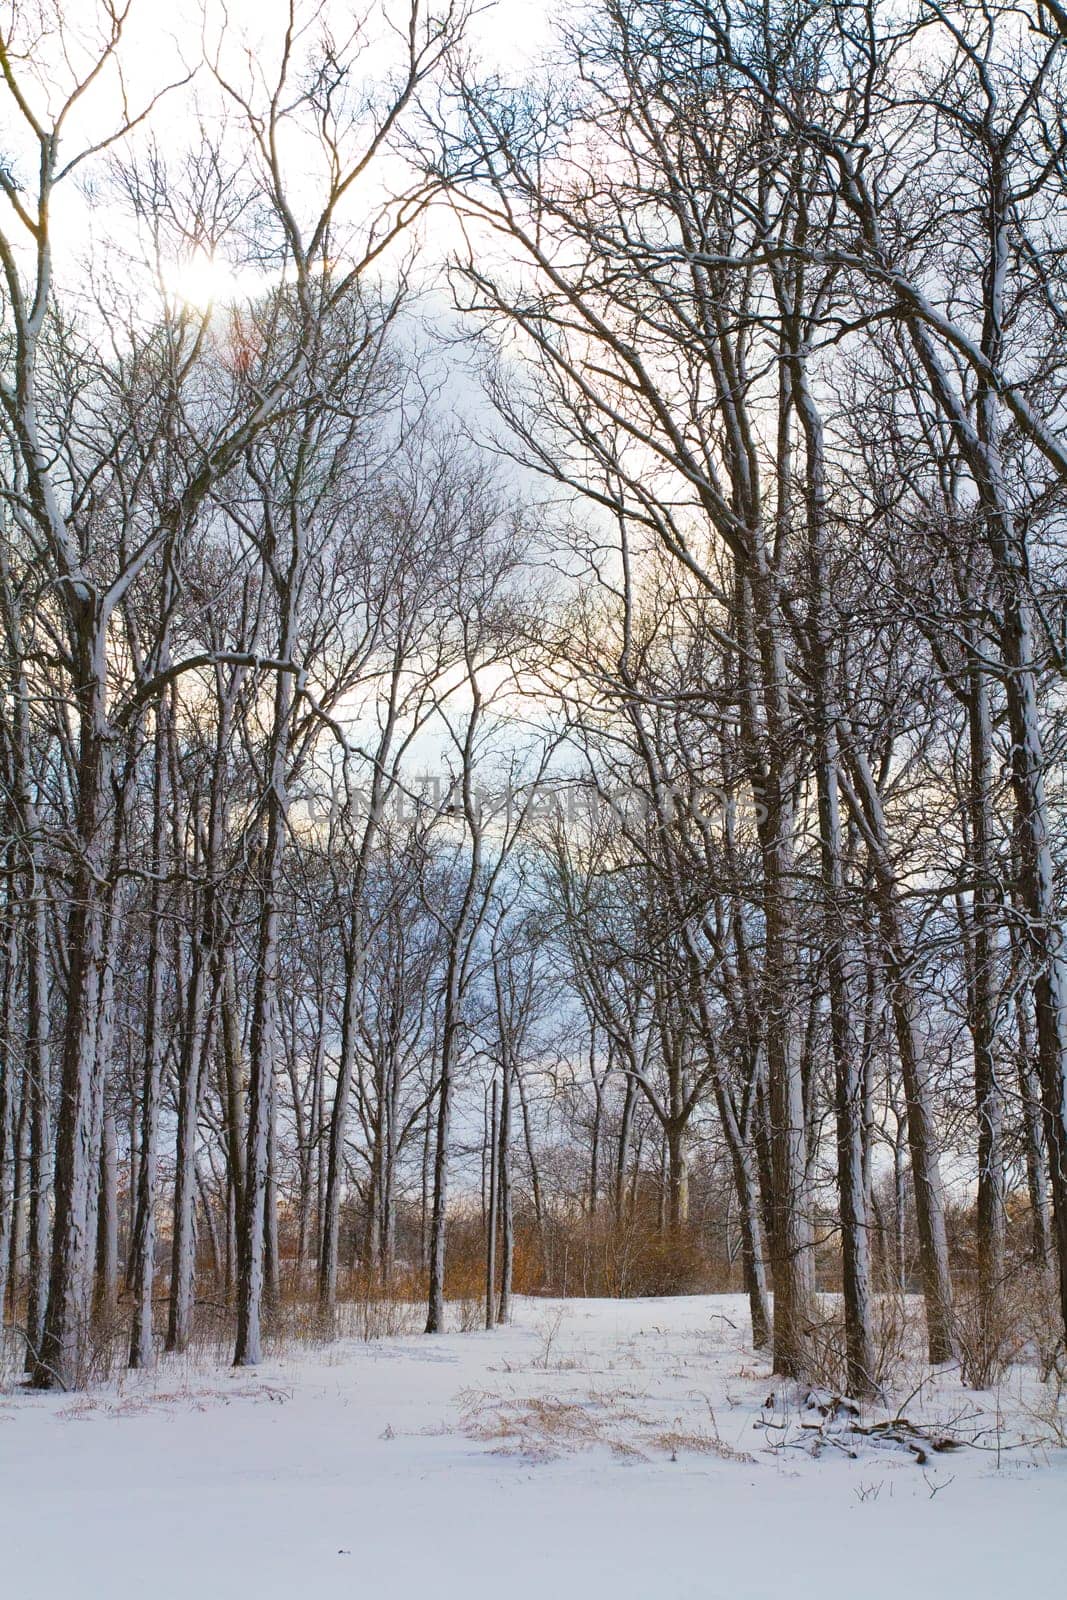 Winter Solitude in Fort Wayne, Indiana - Snow Covered Forest at Dawn by njproductions